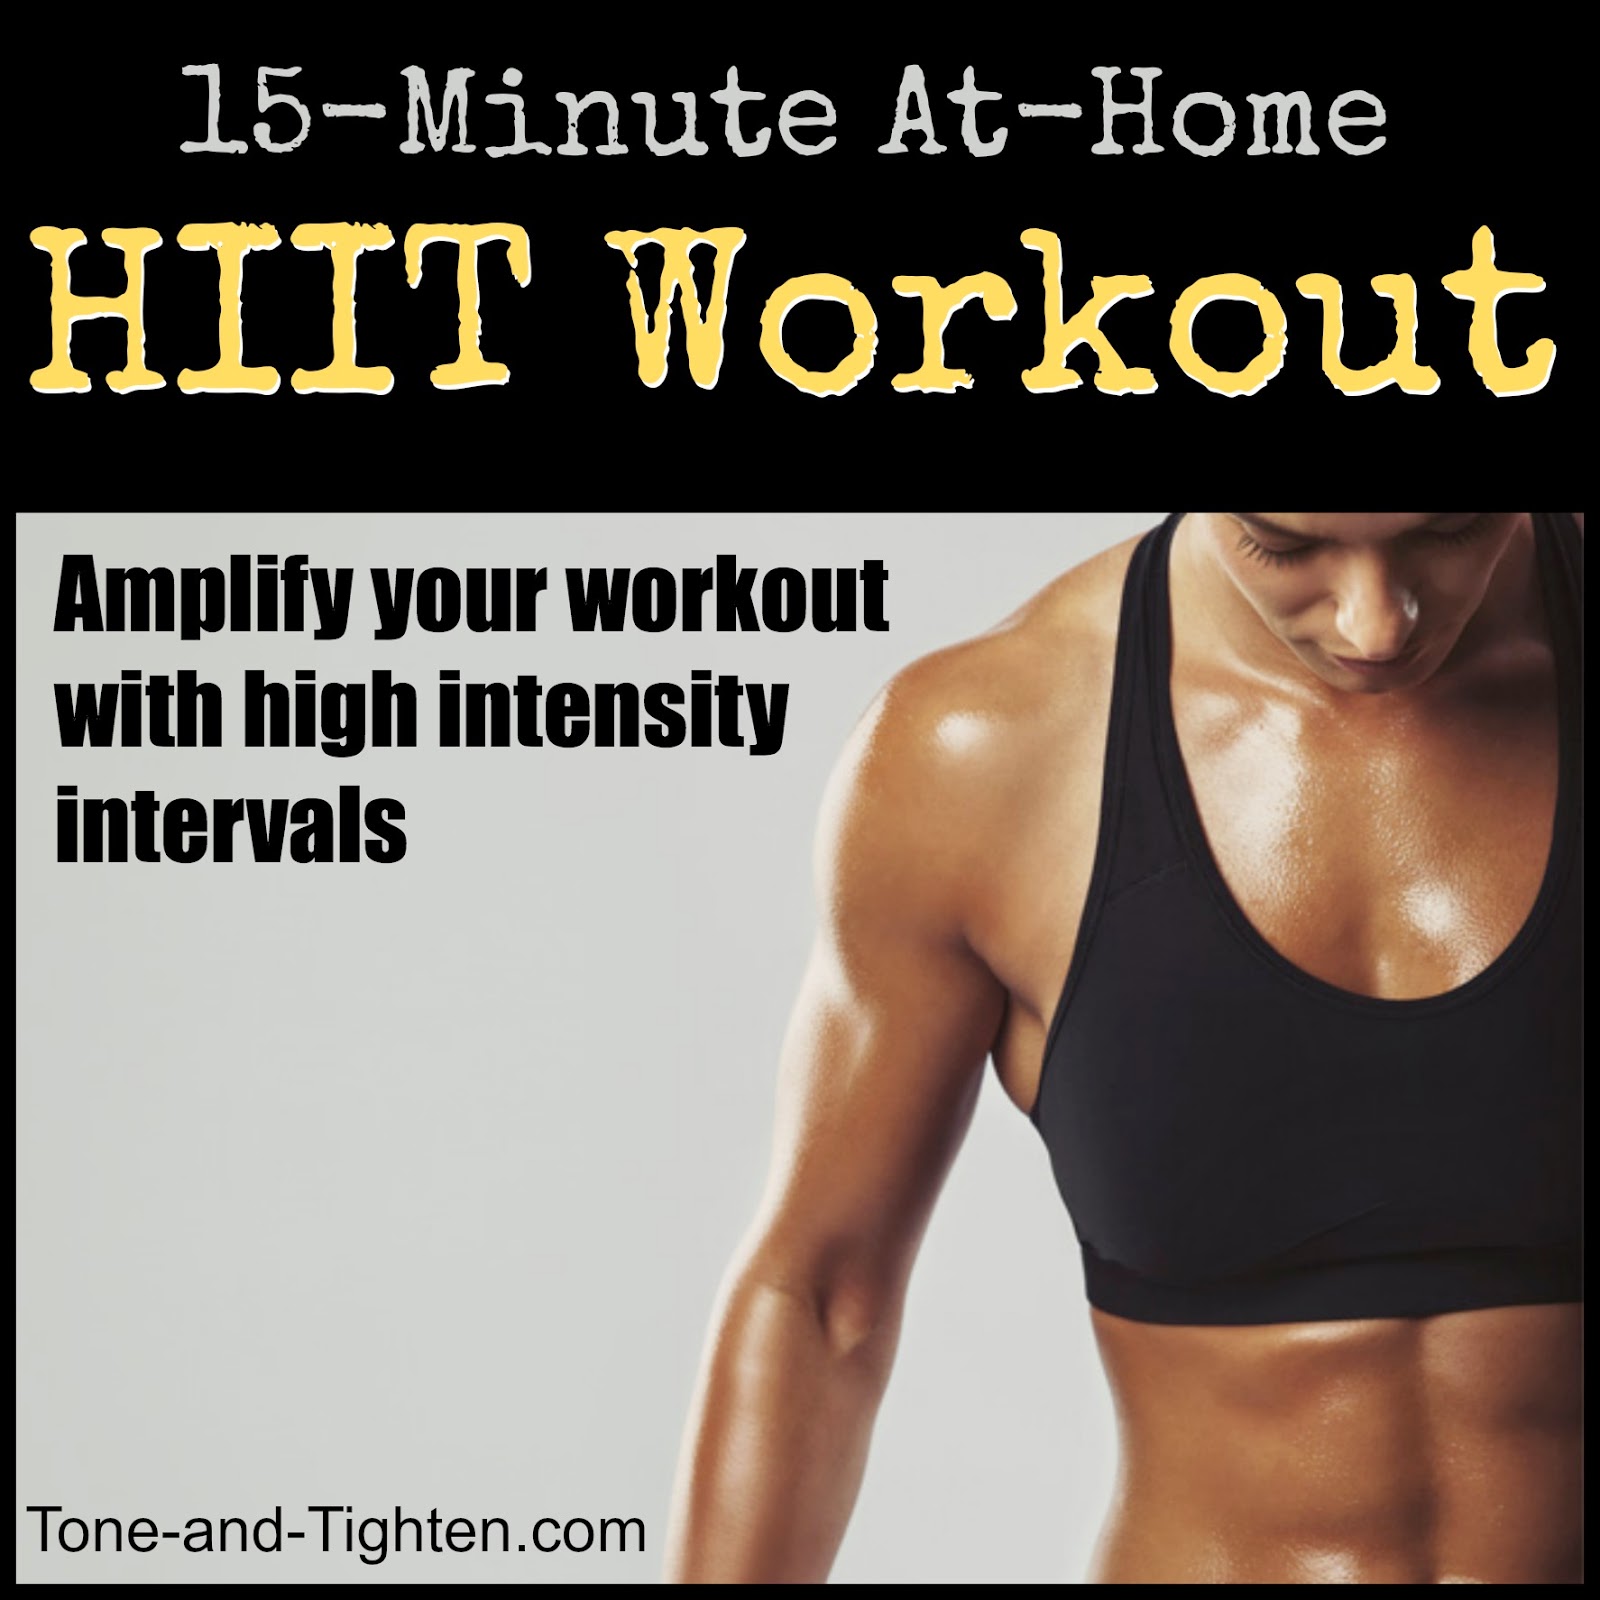 15-Minute At-Home HIIT Workout – High intensity interval training at home